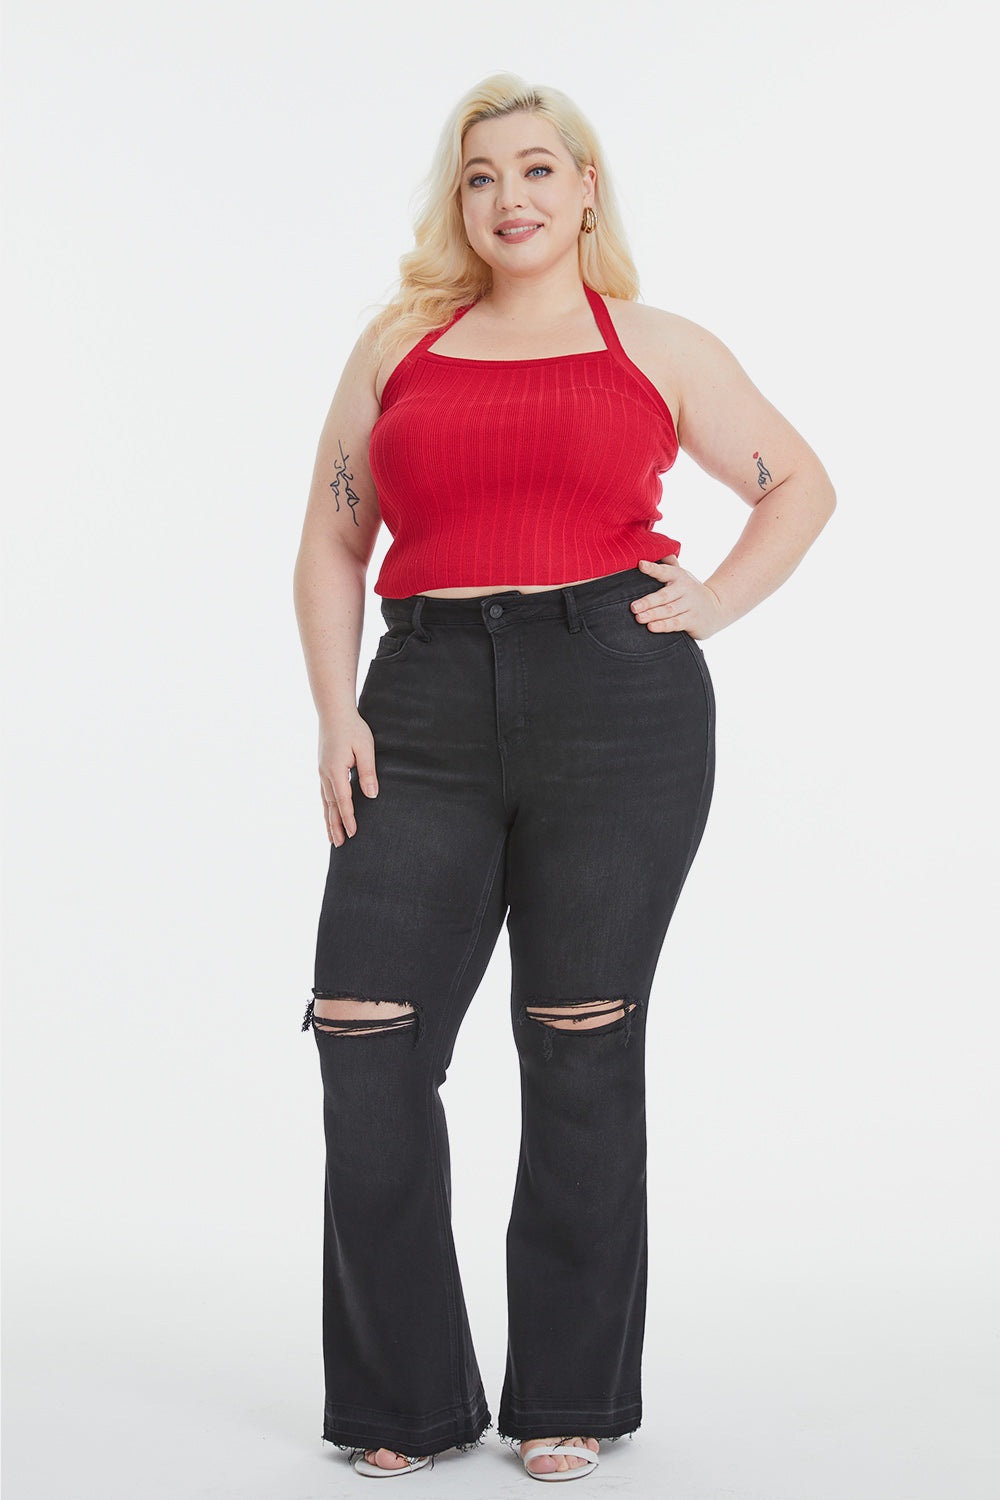 BAYEAS Full Size High Waist Distressed Raw Hem Flare Jeans | CLOTHING,SHOES & ACCESSORIES | BAYEAS, jeans, plus size, Ship from USA | Trendsi